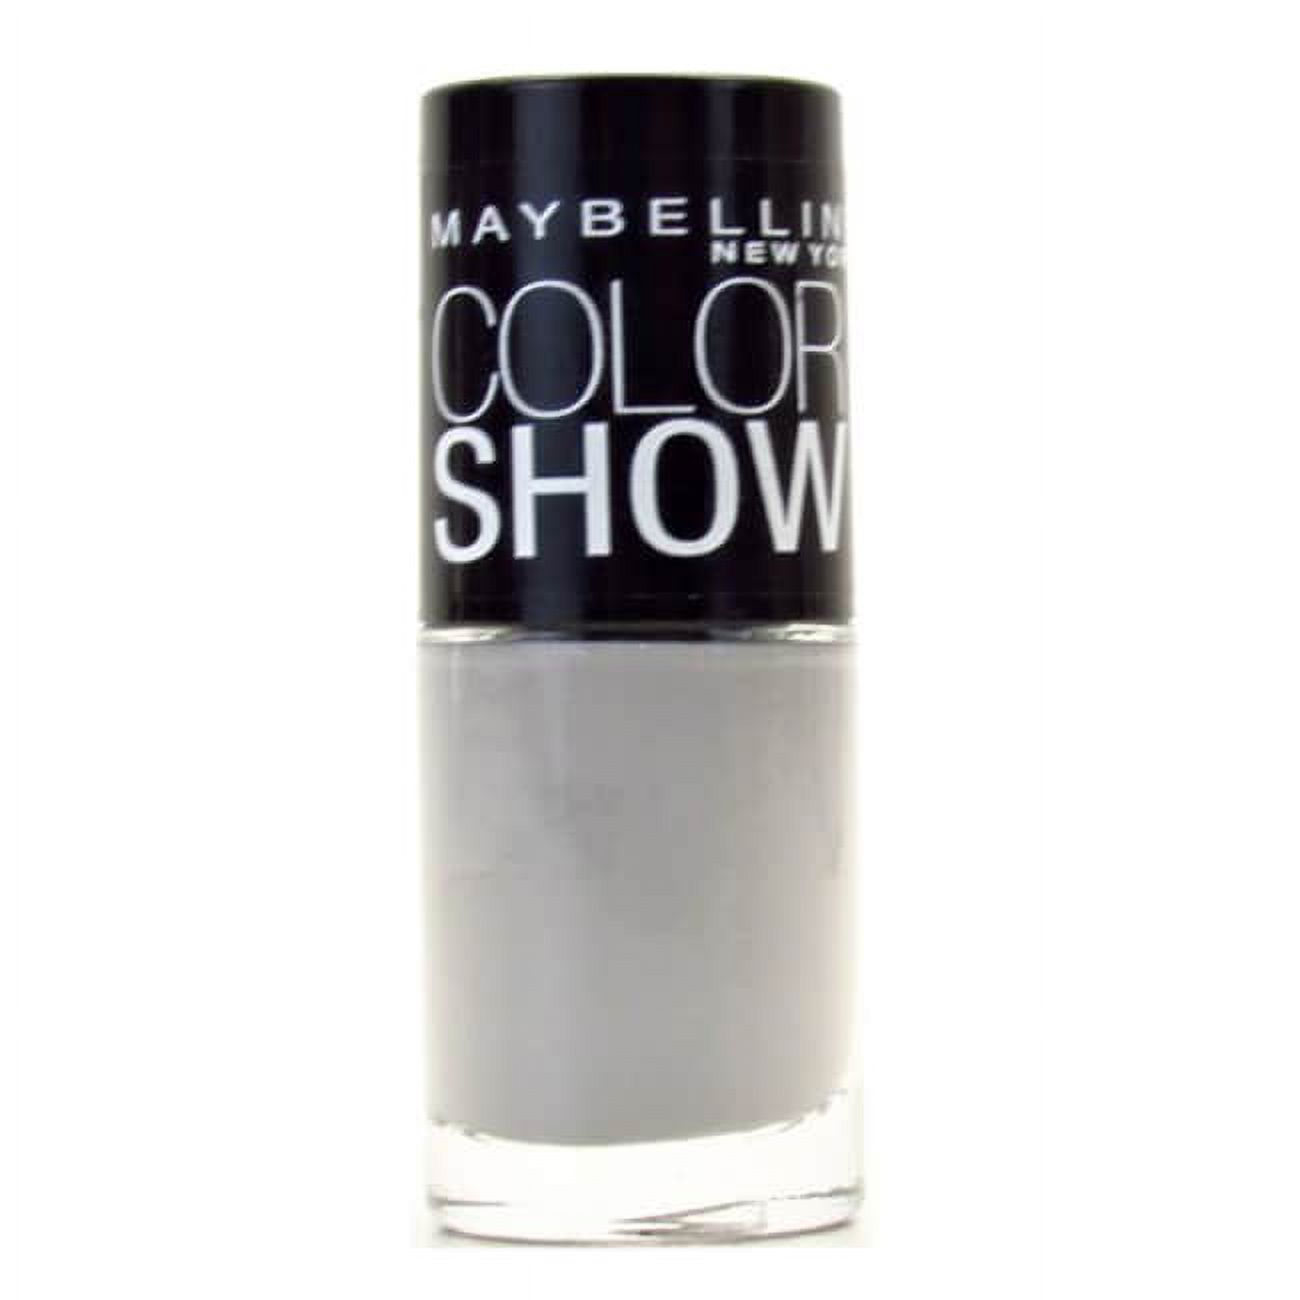 Maybelline New York Color Show Nail Lacquer, Audacious Asphalt, 0.23 Fluid Ounce - image 2 of 2